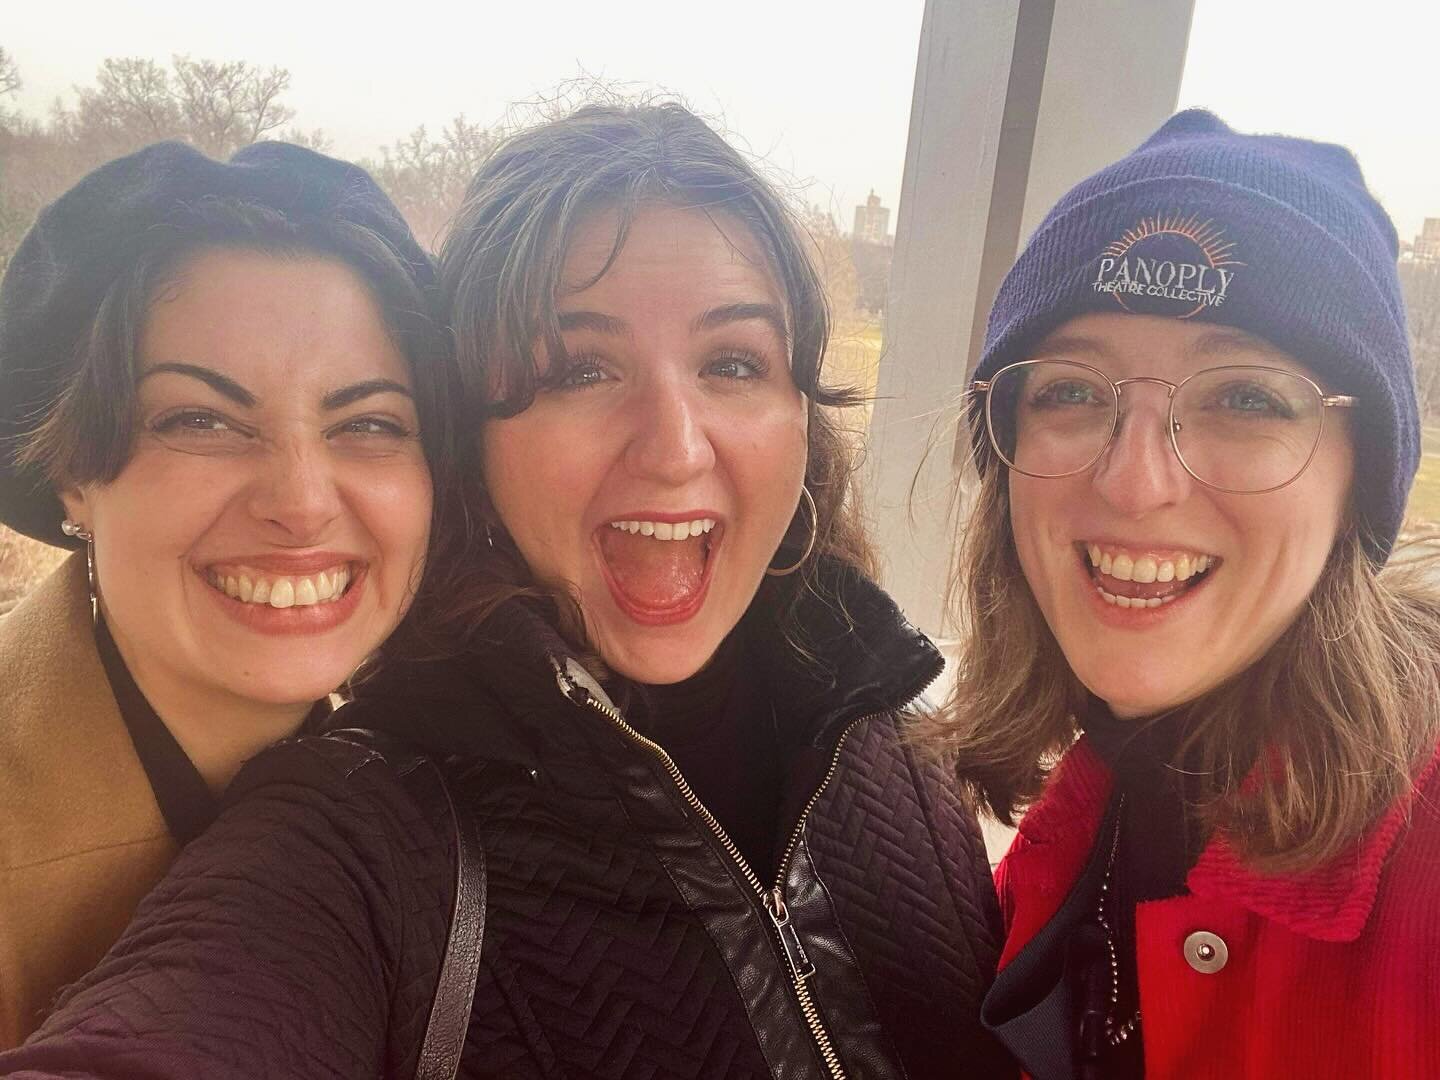 It&rsquo;s International Women&rsquo;s Day! The three of us are always proud to create &amp; share stories with a gender-diverse perspective. To all of the hardworking, talented, incredible women in our community, we say bravo, today &amp; every day!